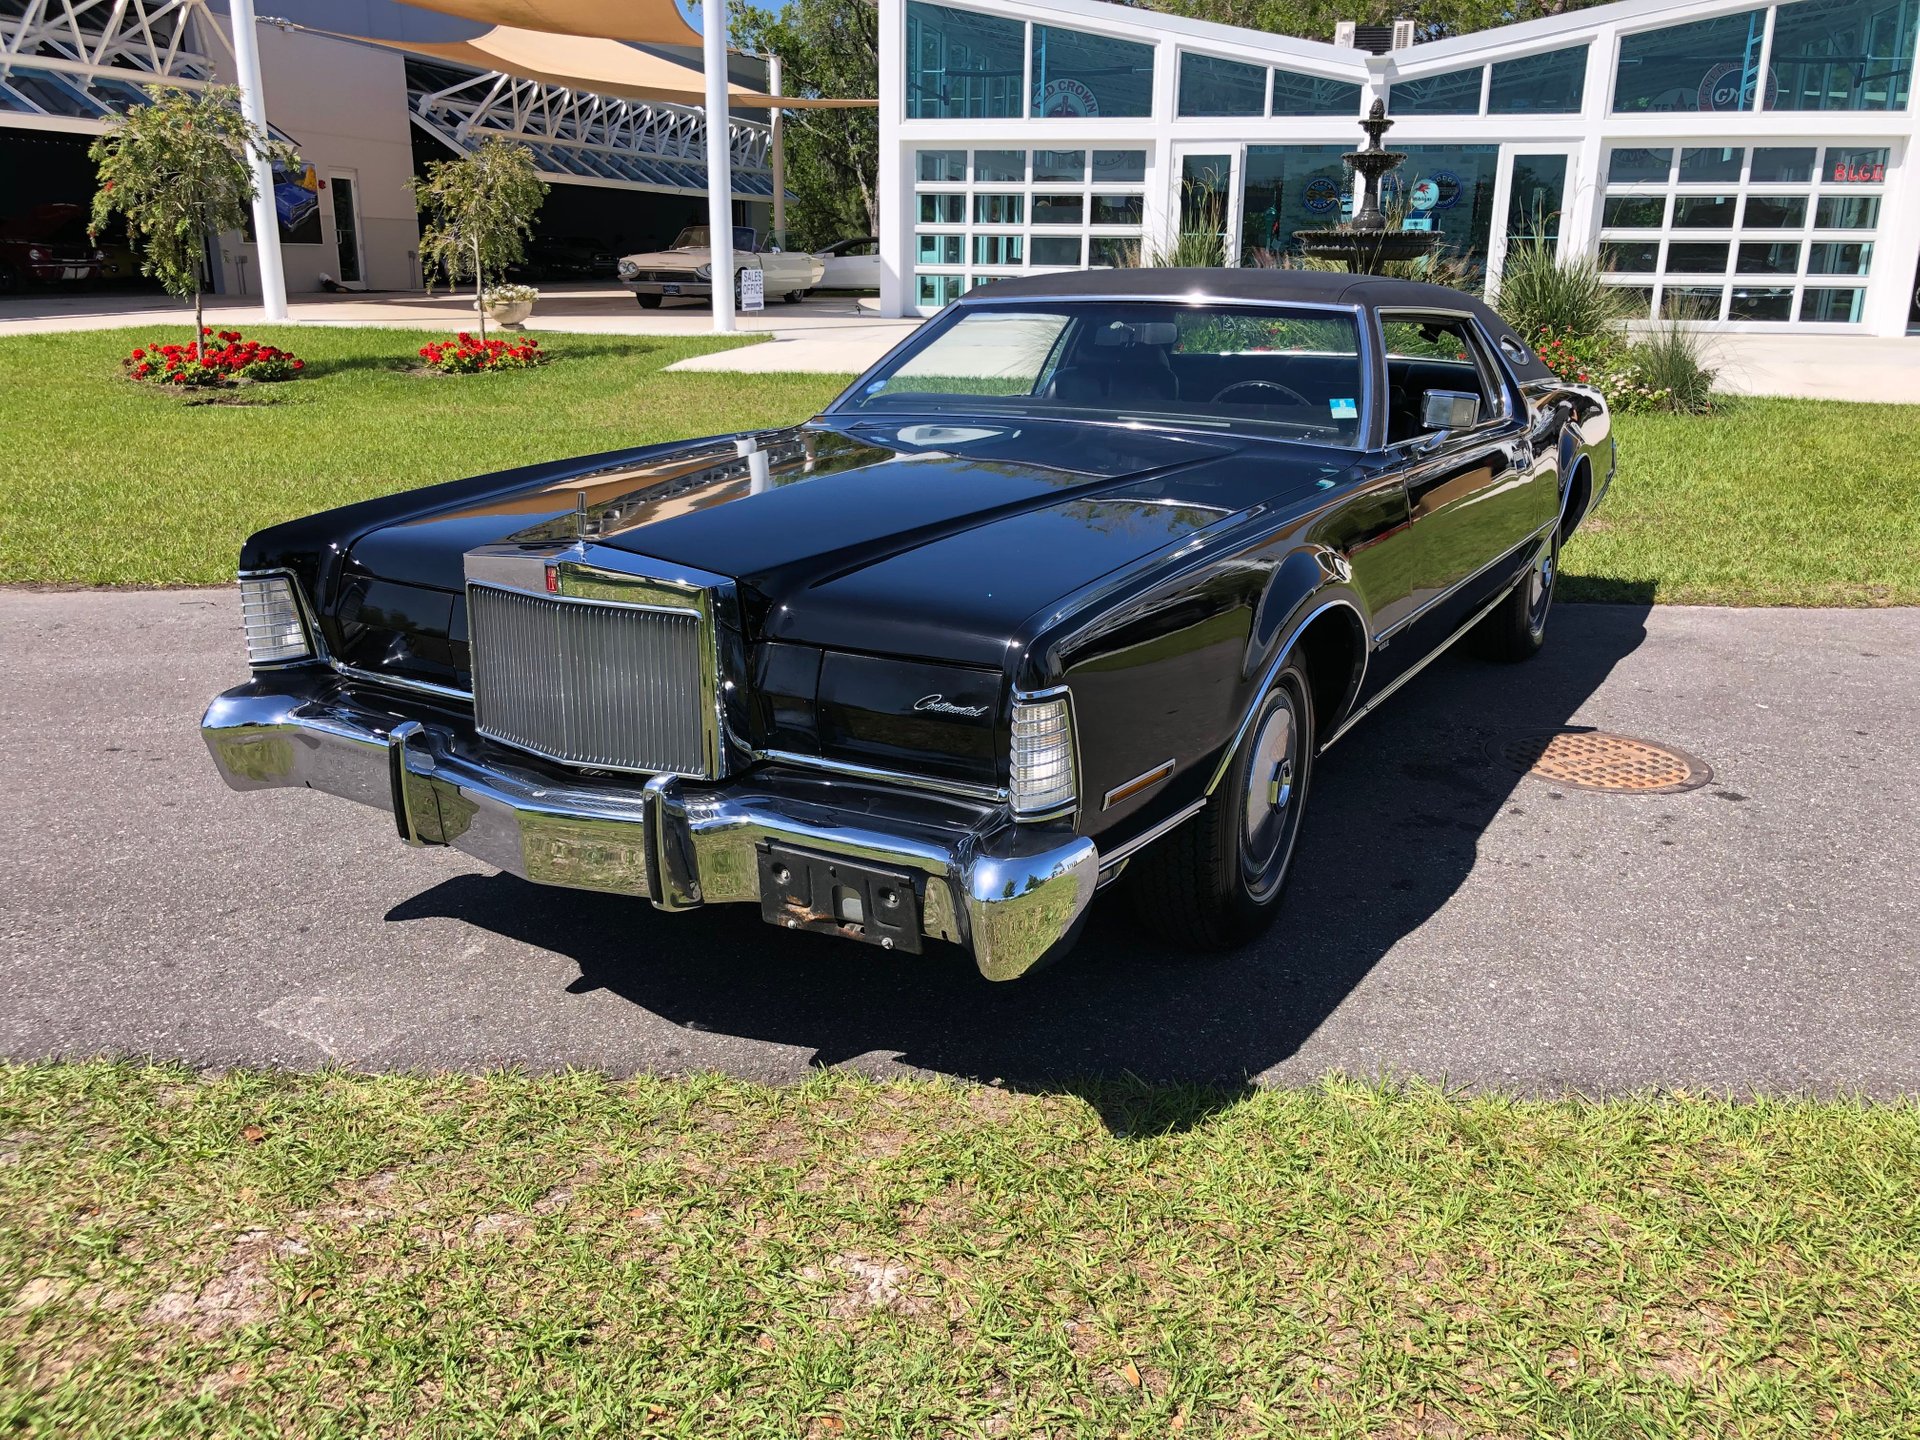 1973 Lincoln Continental Mk Iv Classic Cars And Used Cars For Sale In Tampa Fl